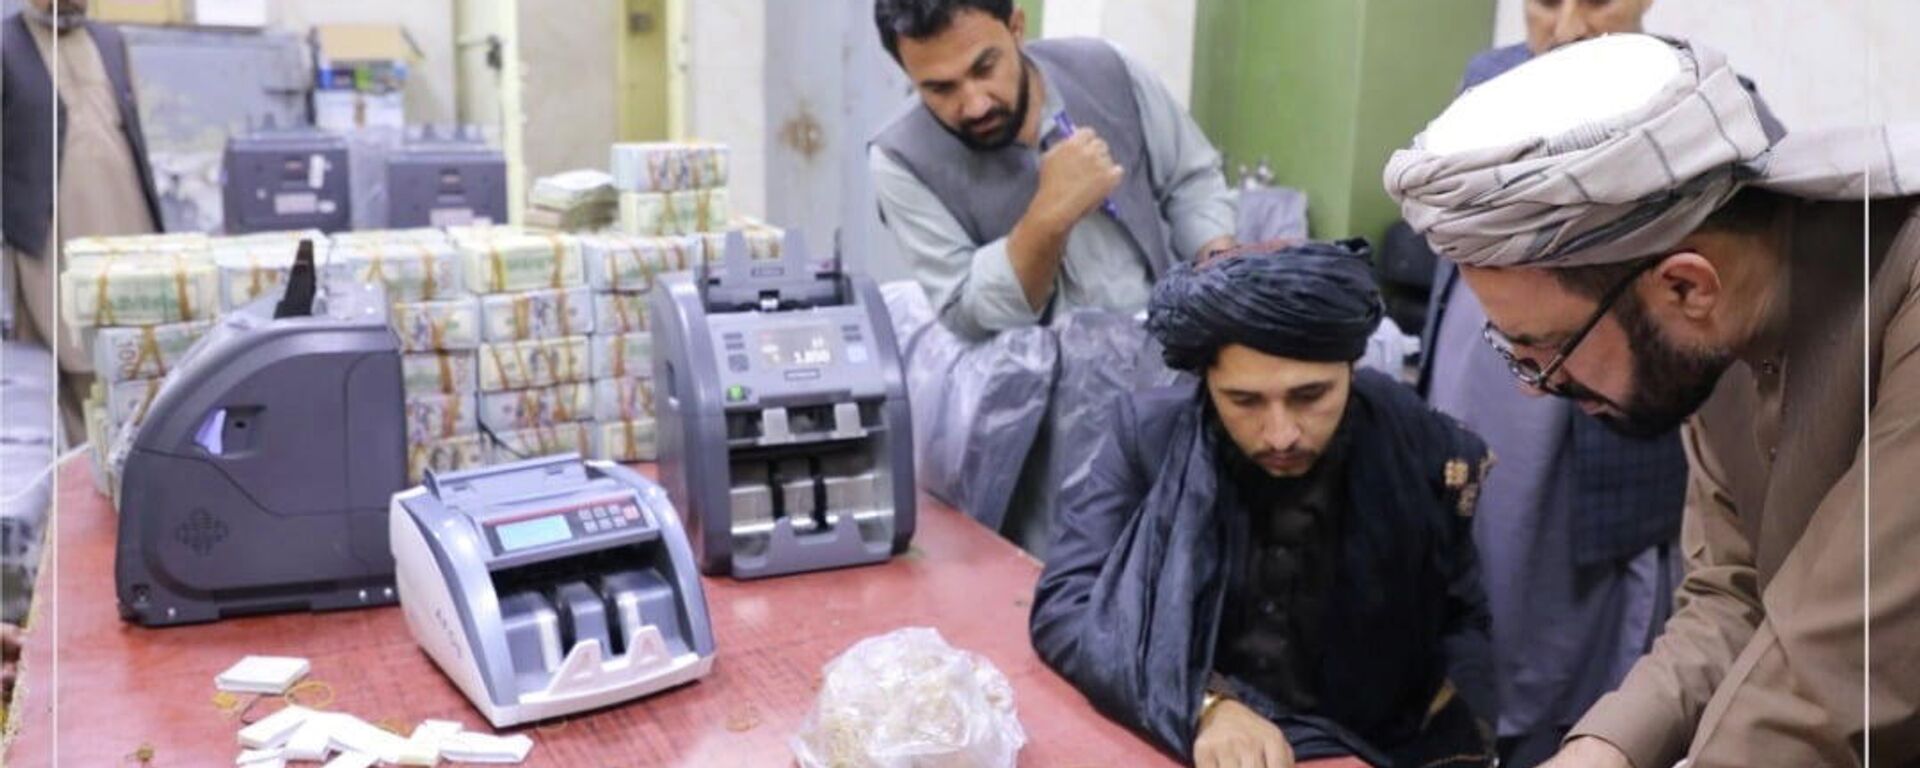 Men are pictured as Afghanistan's Taliban-controlled central bank seizes a large amount of money in cash and gold from former top government officials, including former vice president Amrullah Saleh, in Afghanistan, in this handout obtained by Reuters on September 15, 2021 - Sputnik International, 1920, 15.09.2021